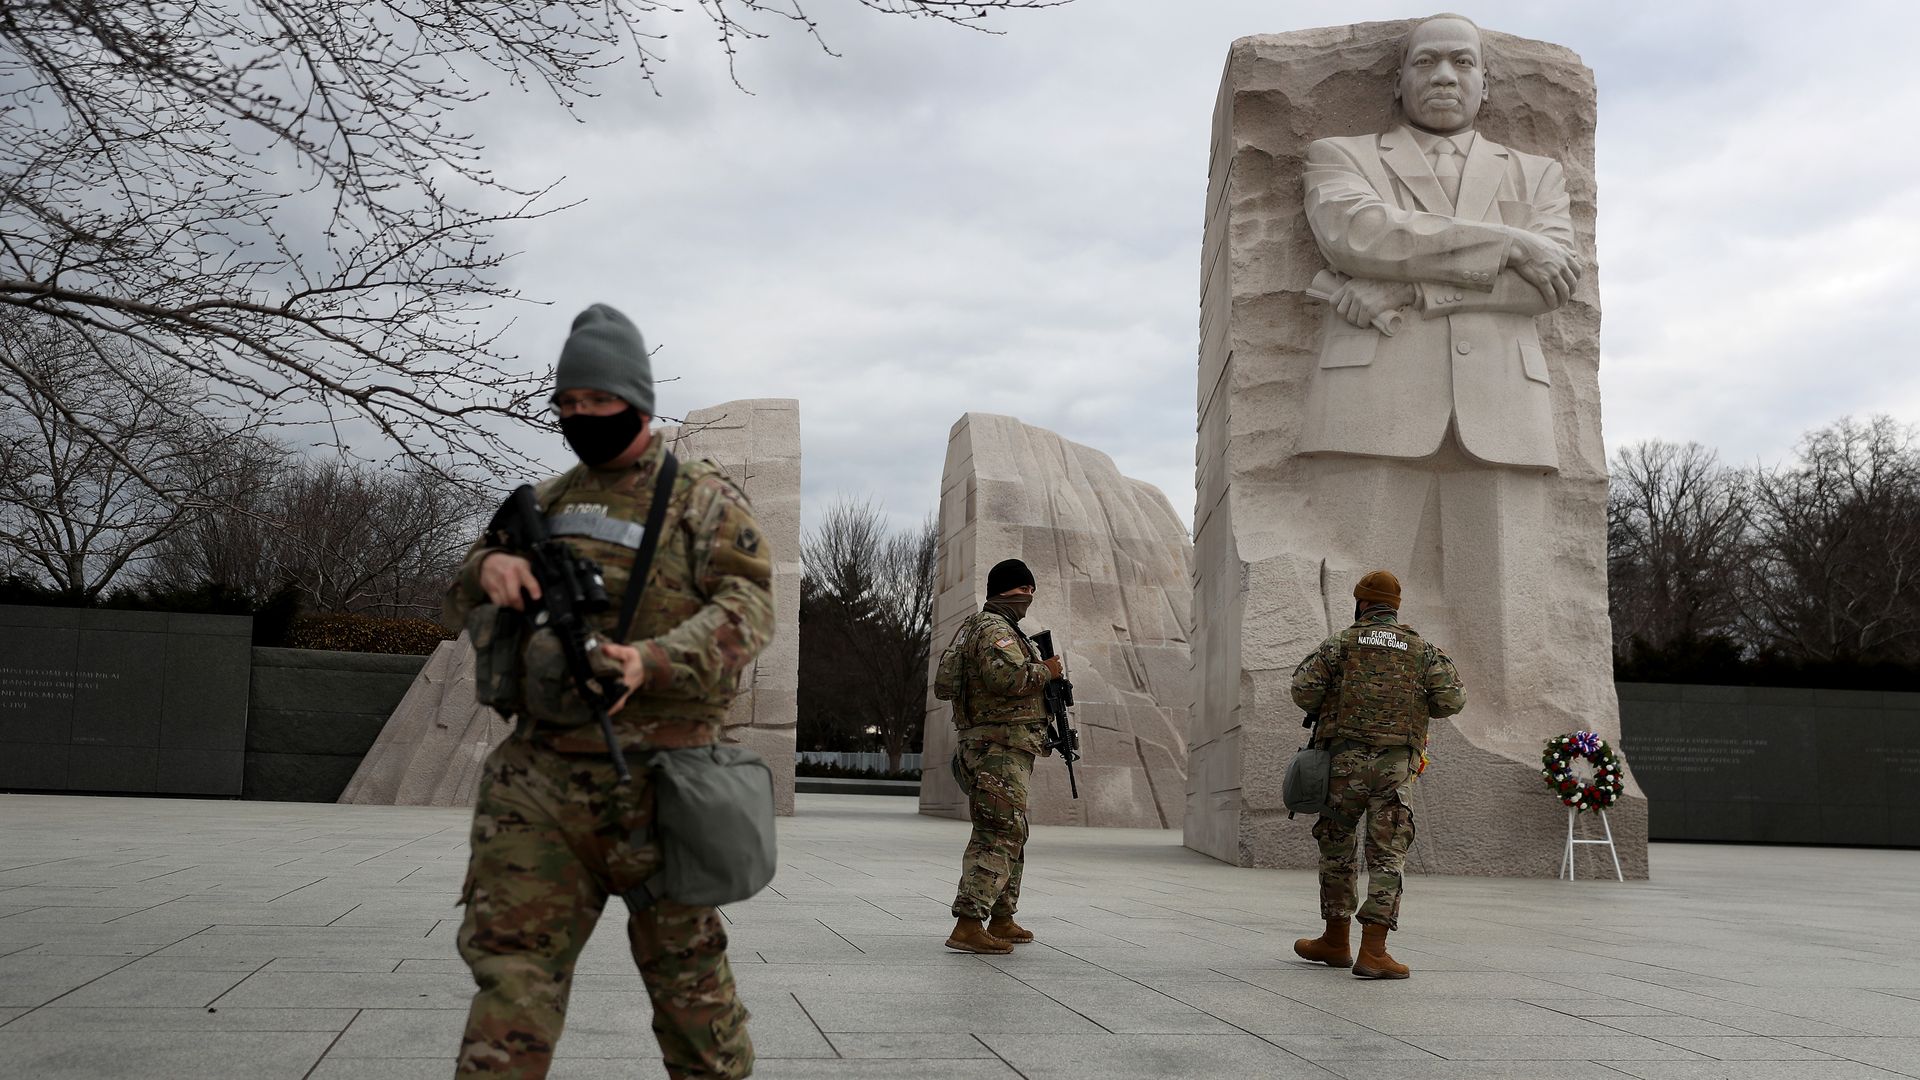 National Guardsmen are seen near the memorial in Washington to Dr. Martin Luther King Jr.